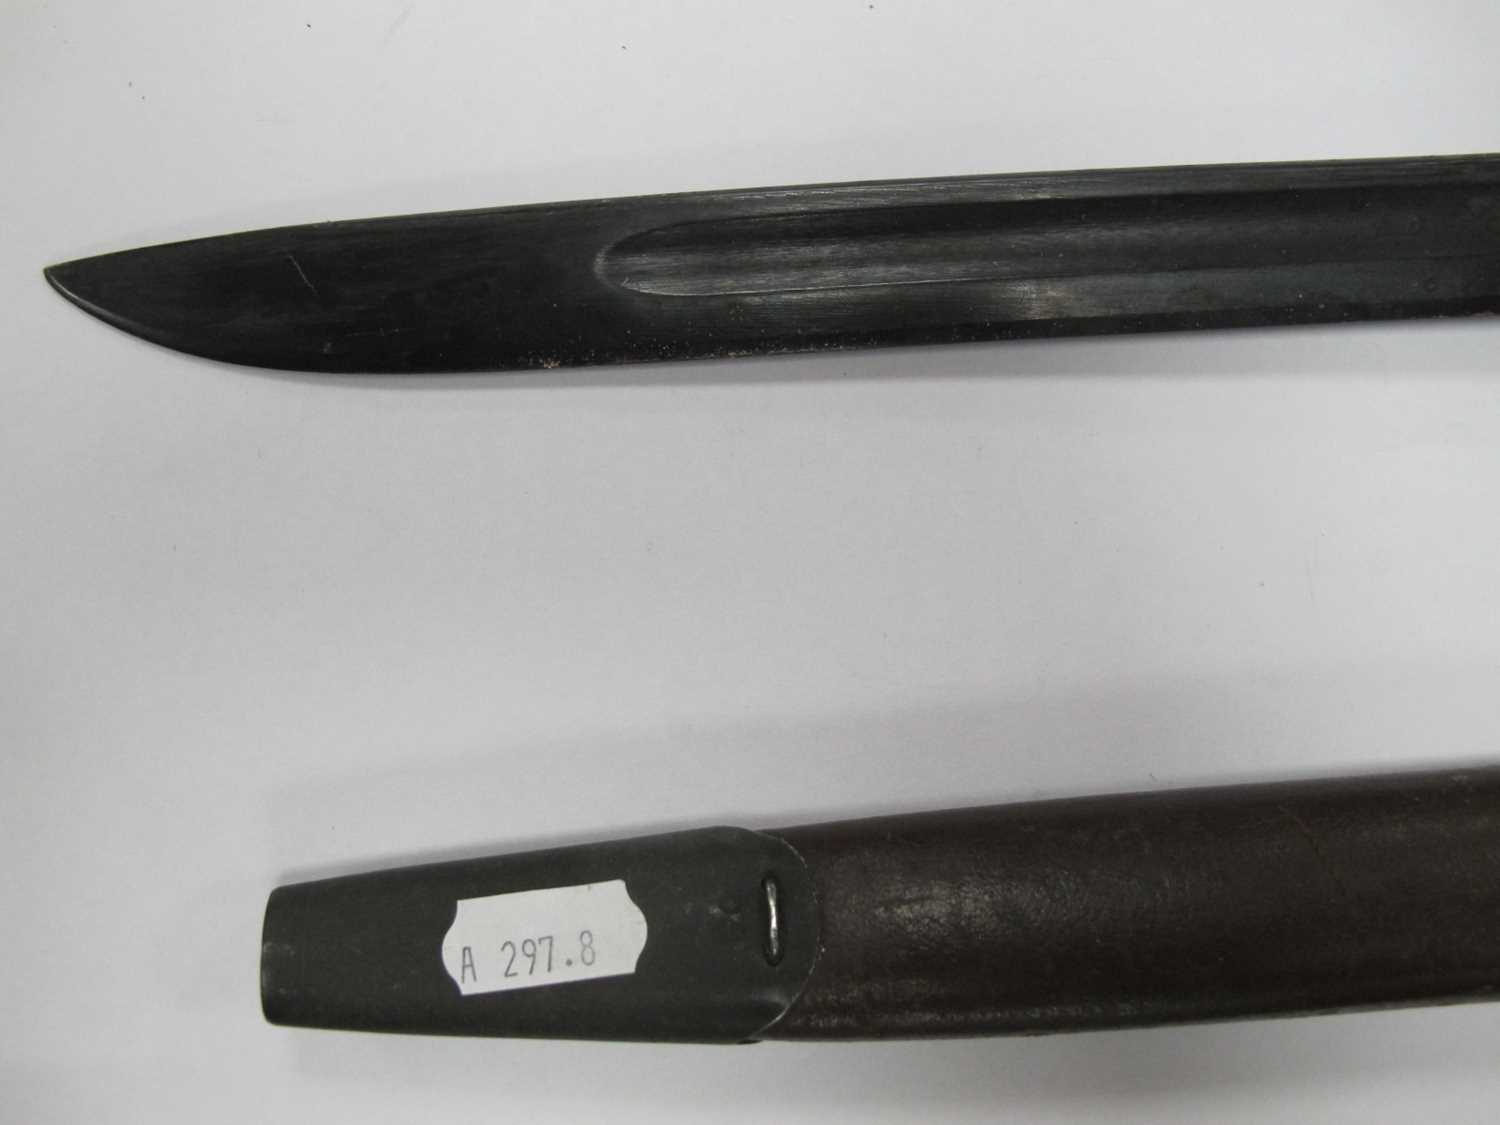 WWII Australian 1907 Pattern Short Bayonet, with various marks on blade including year '45', - Image 12 of 12